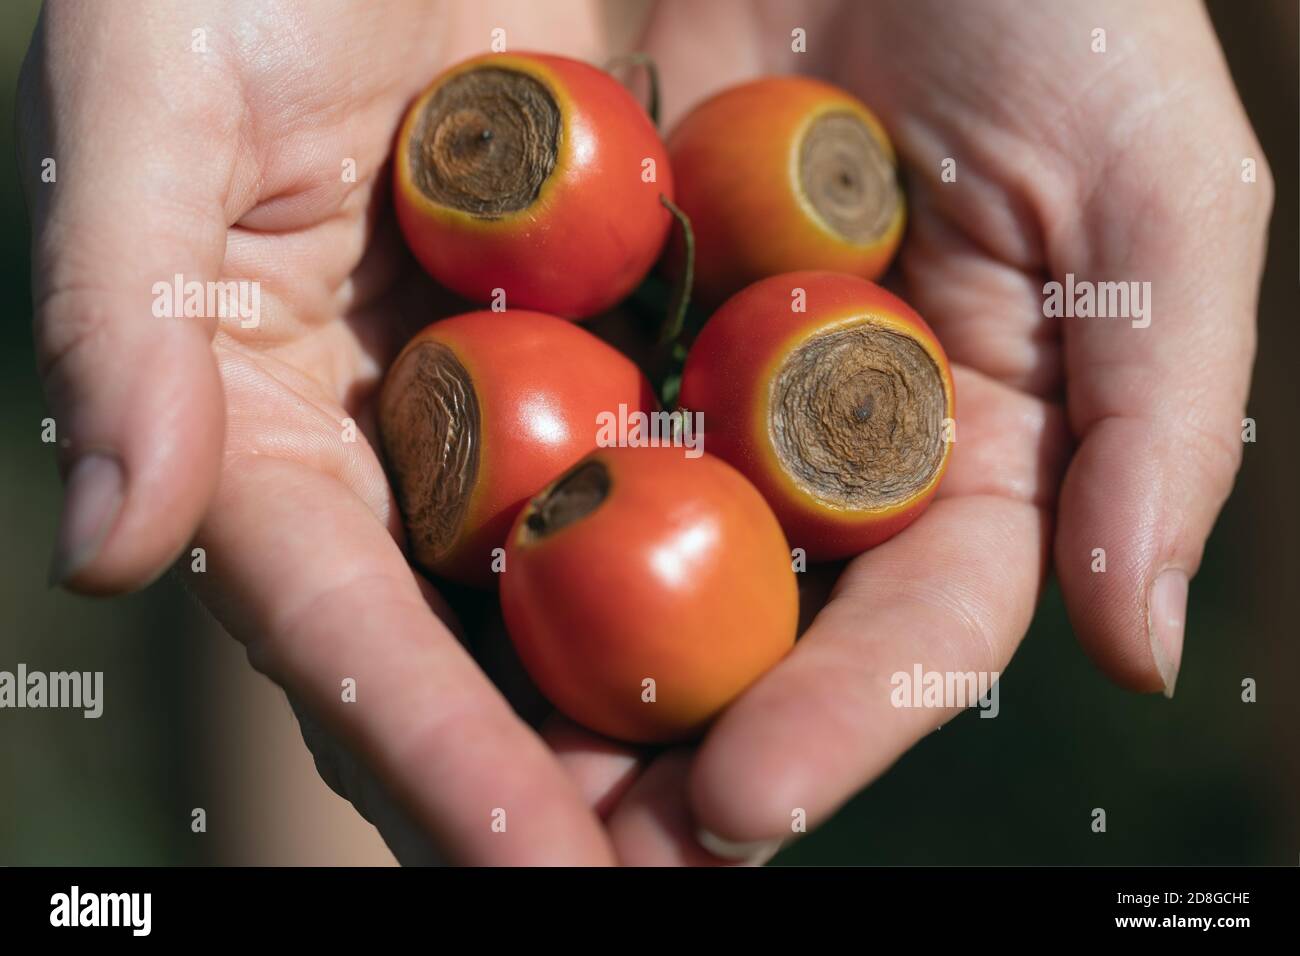 Sick tomato fruit affected by disease vertex rot. Stock Photo